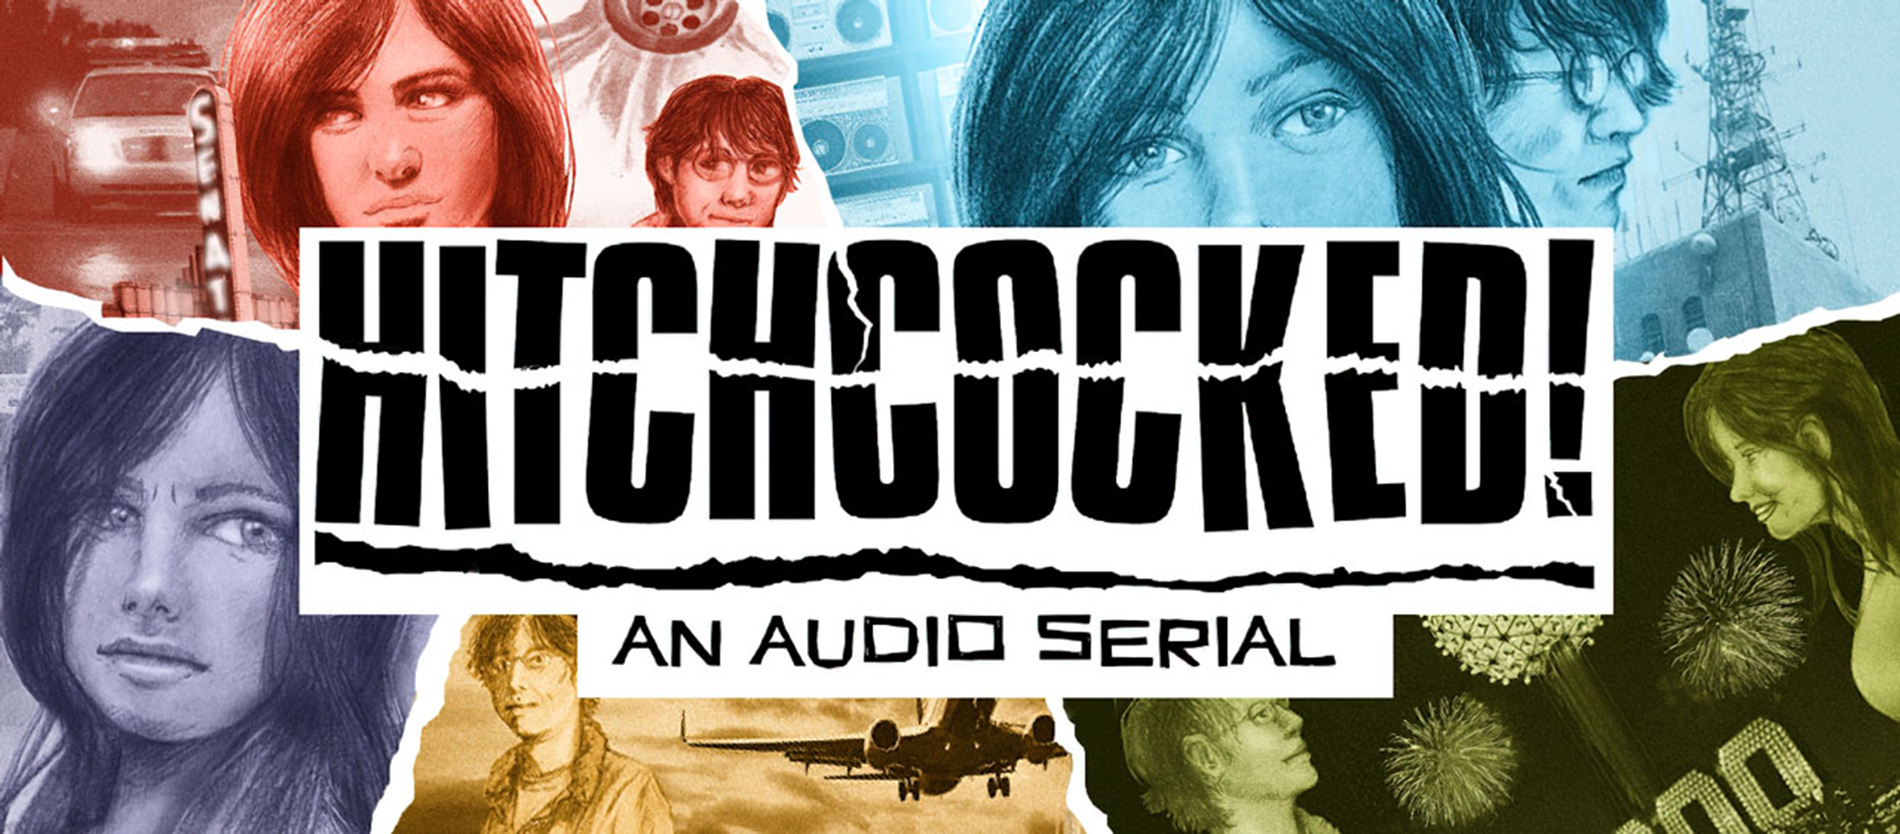 A graphic for Detroit Mercy Theatre Company's production of Hitchcocked! An Audio Serial.